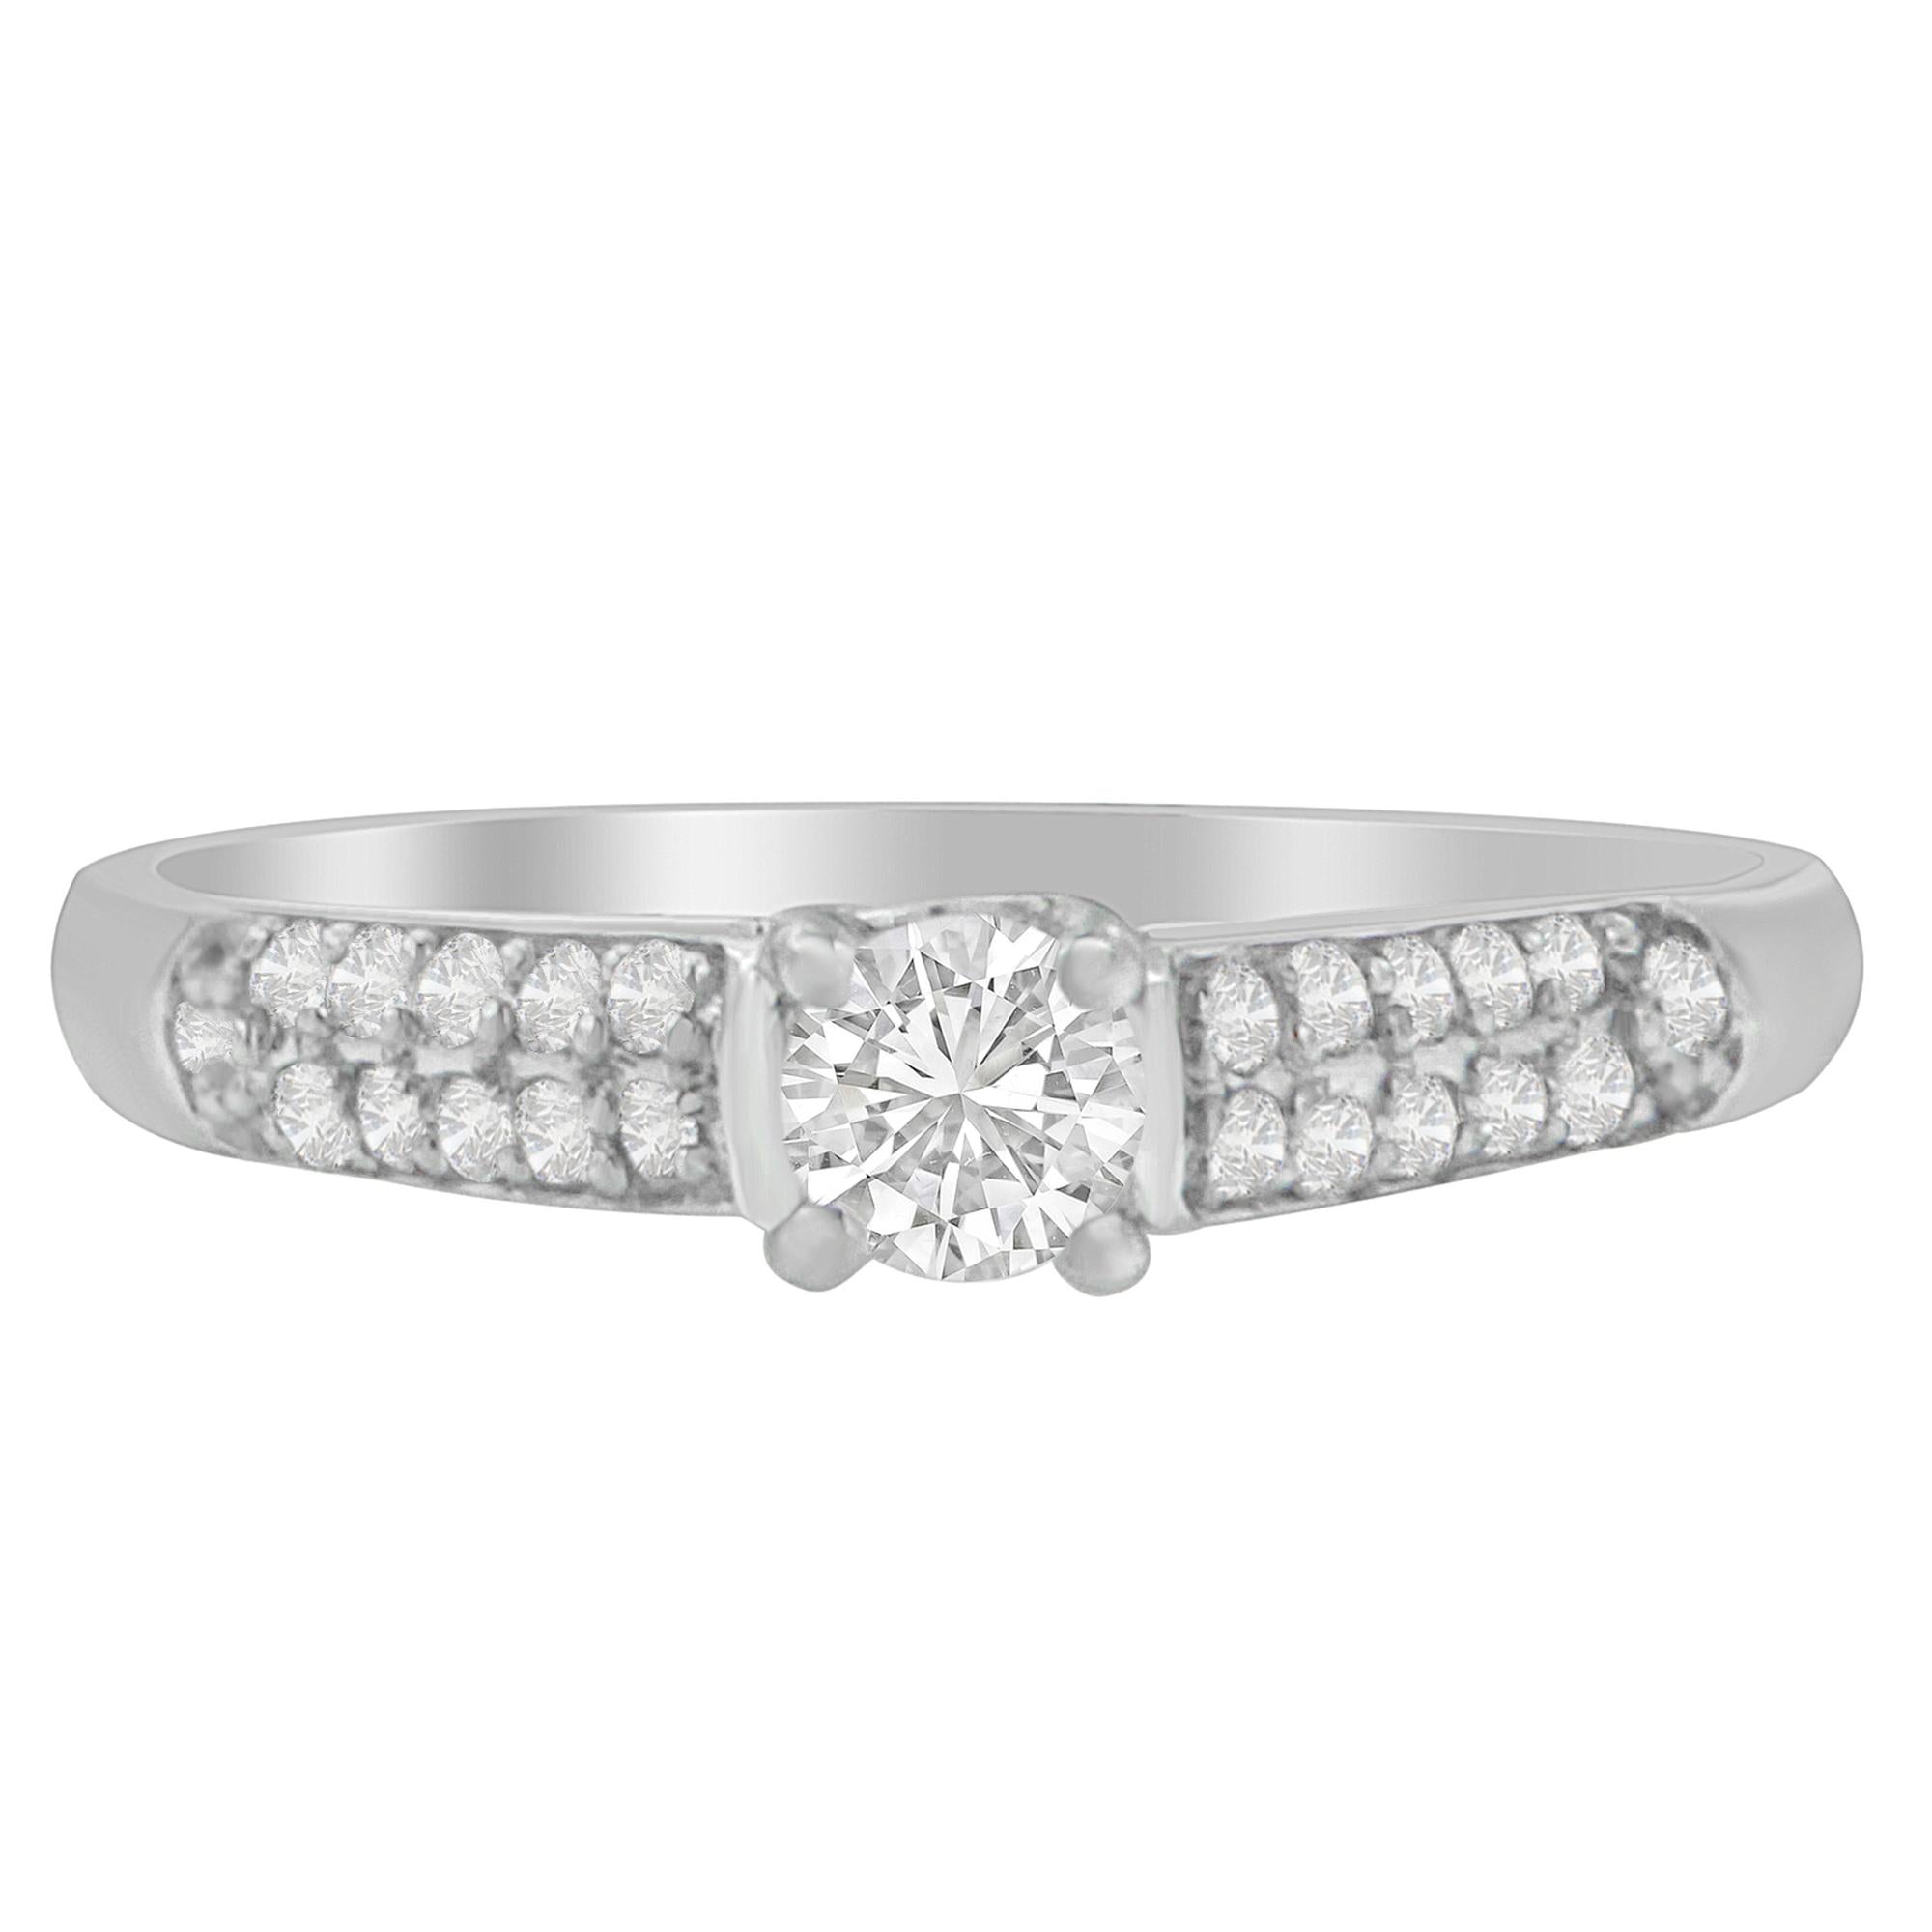 ''14K White Gold Round-Cut Diamond Ring (0.37 cttw, H-I Color, SI2-I1 Clarity)''